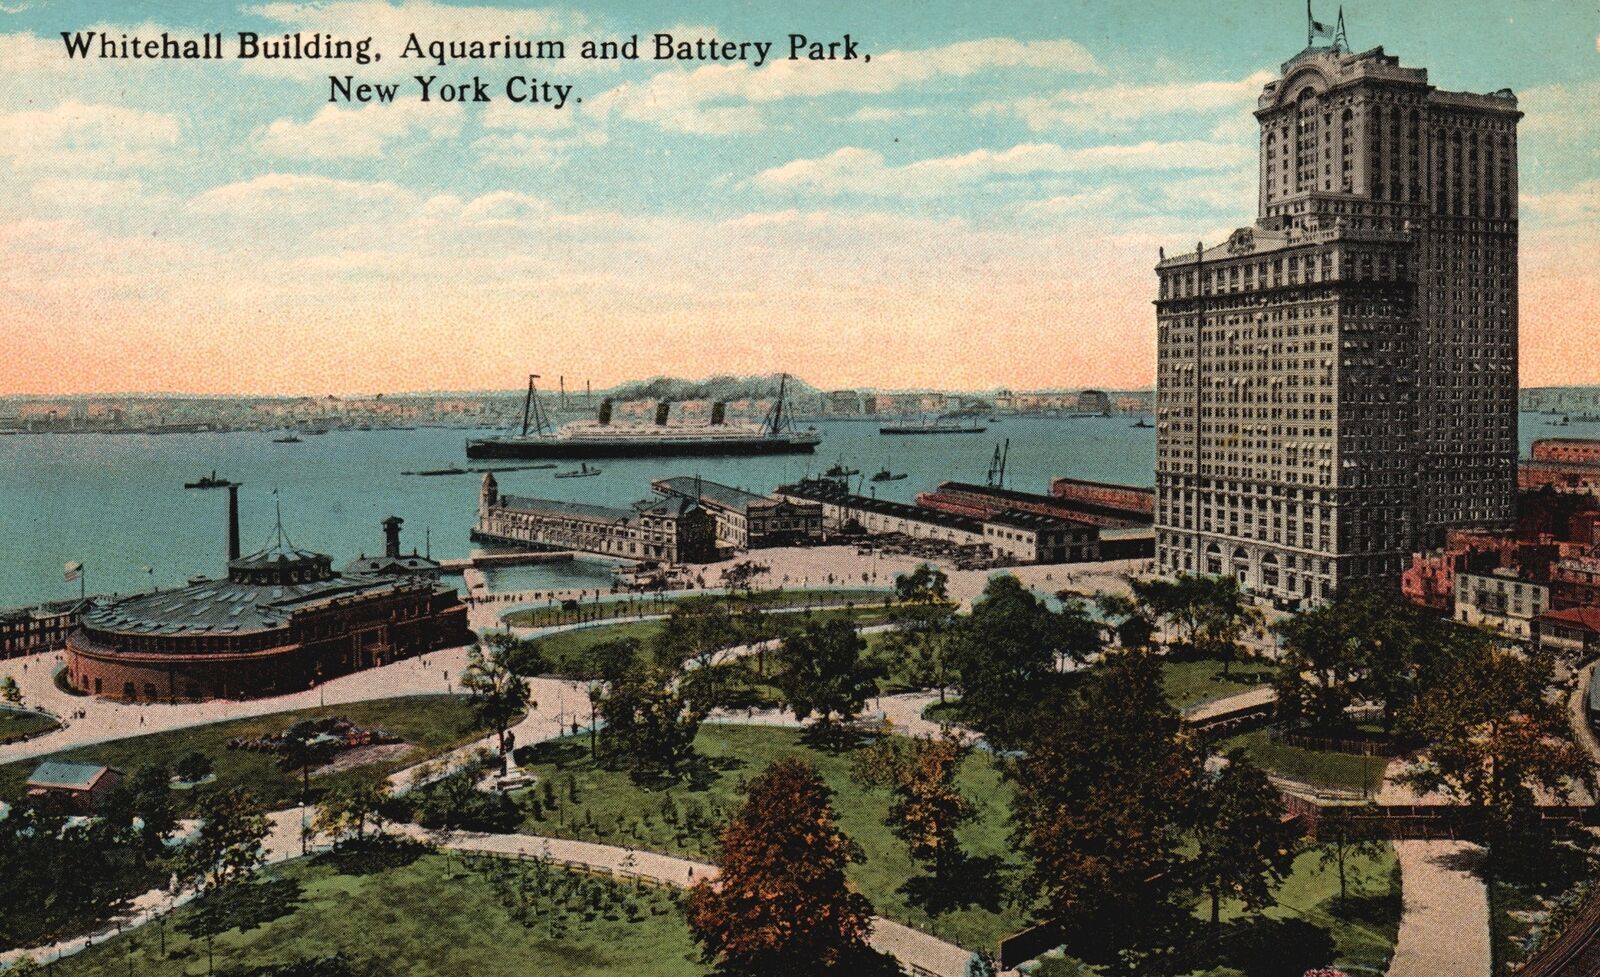 Vintage Images of Battery Park, New York